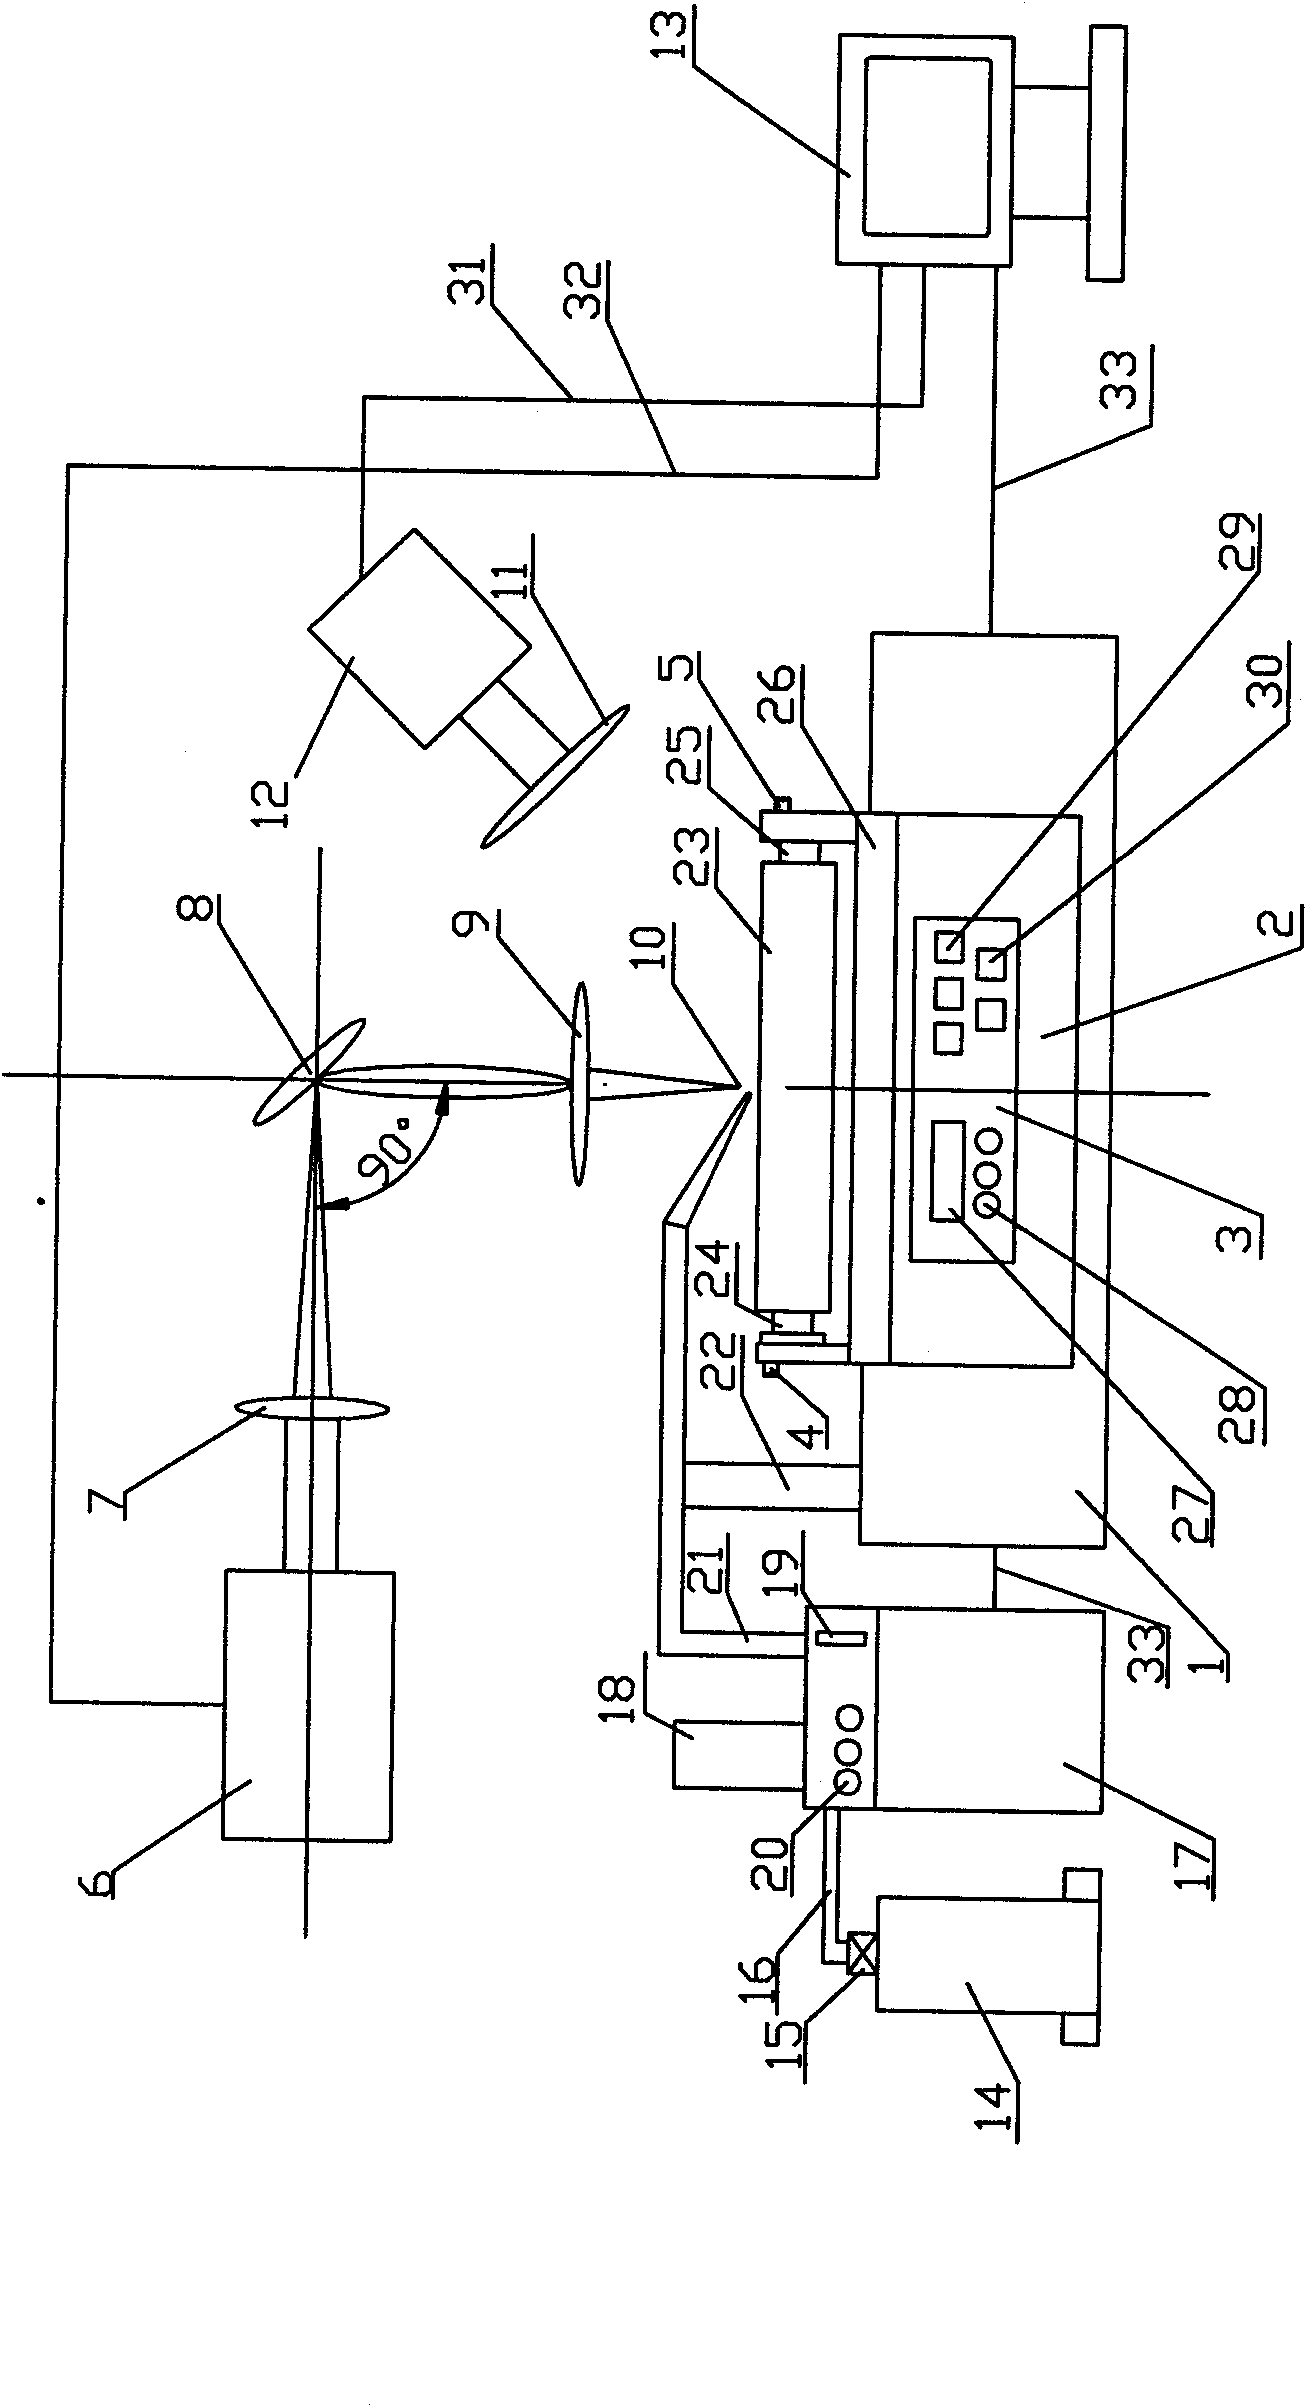 Method for cladding copper alloy layer on surface of steel substrate by laser brazing